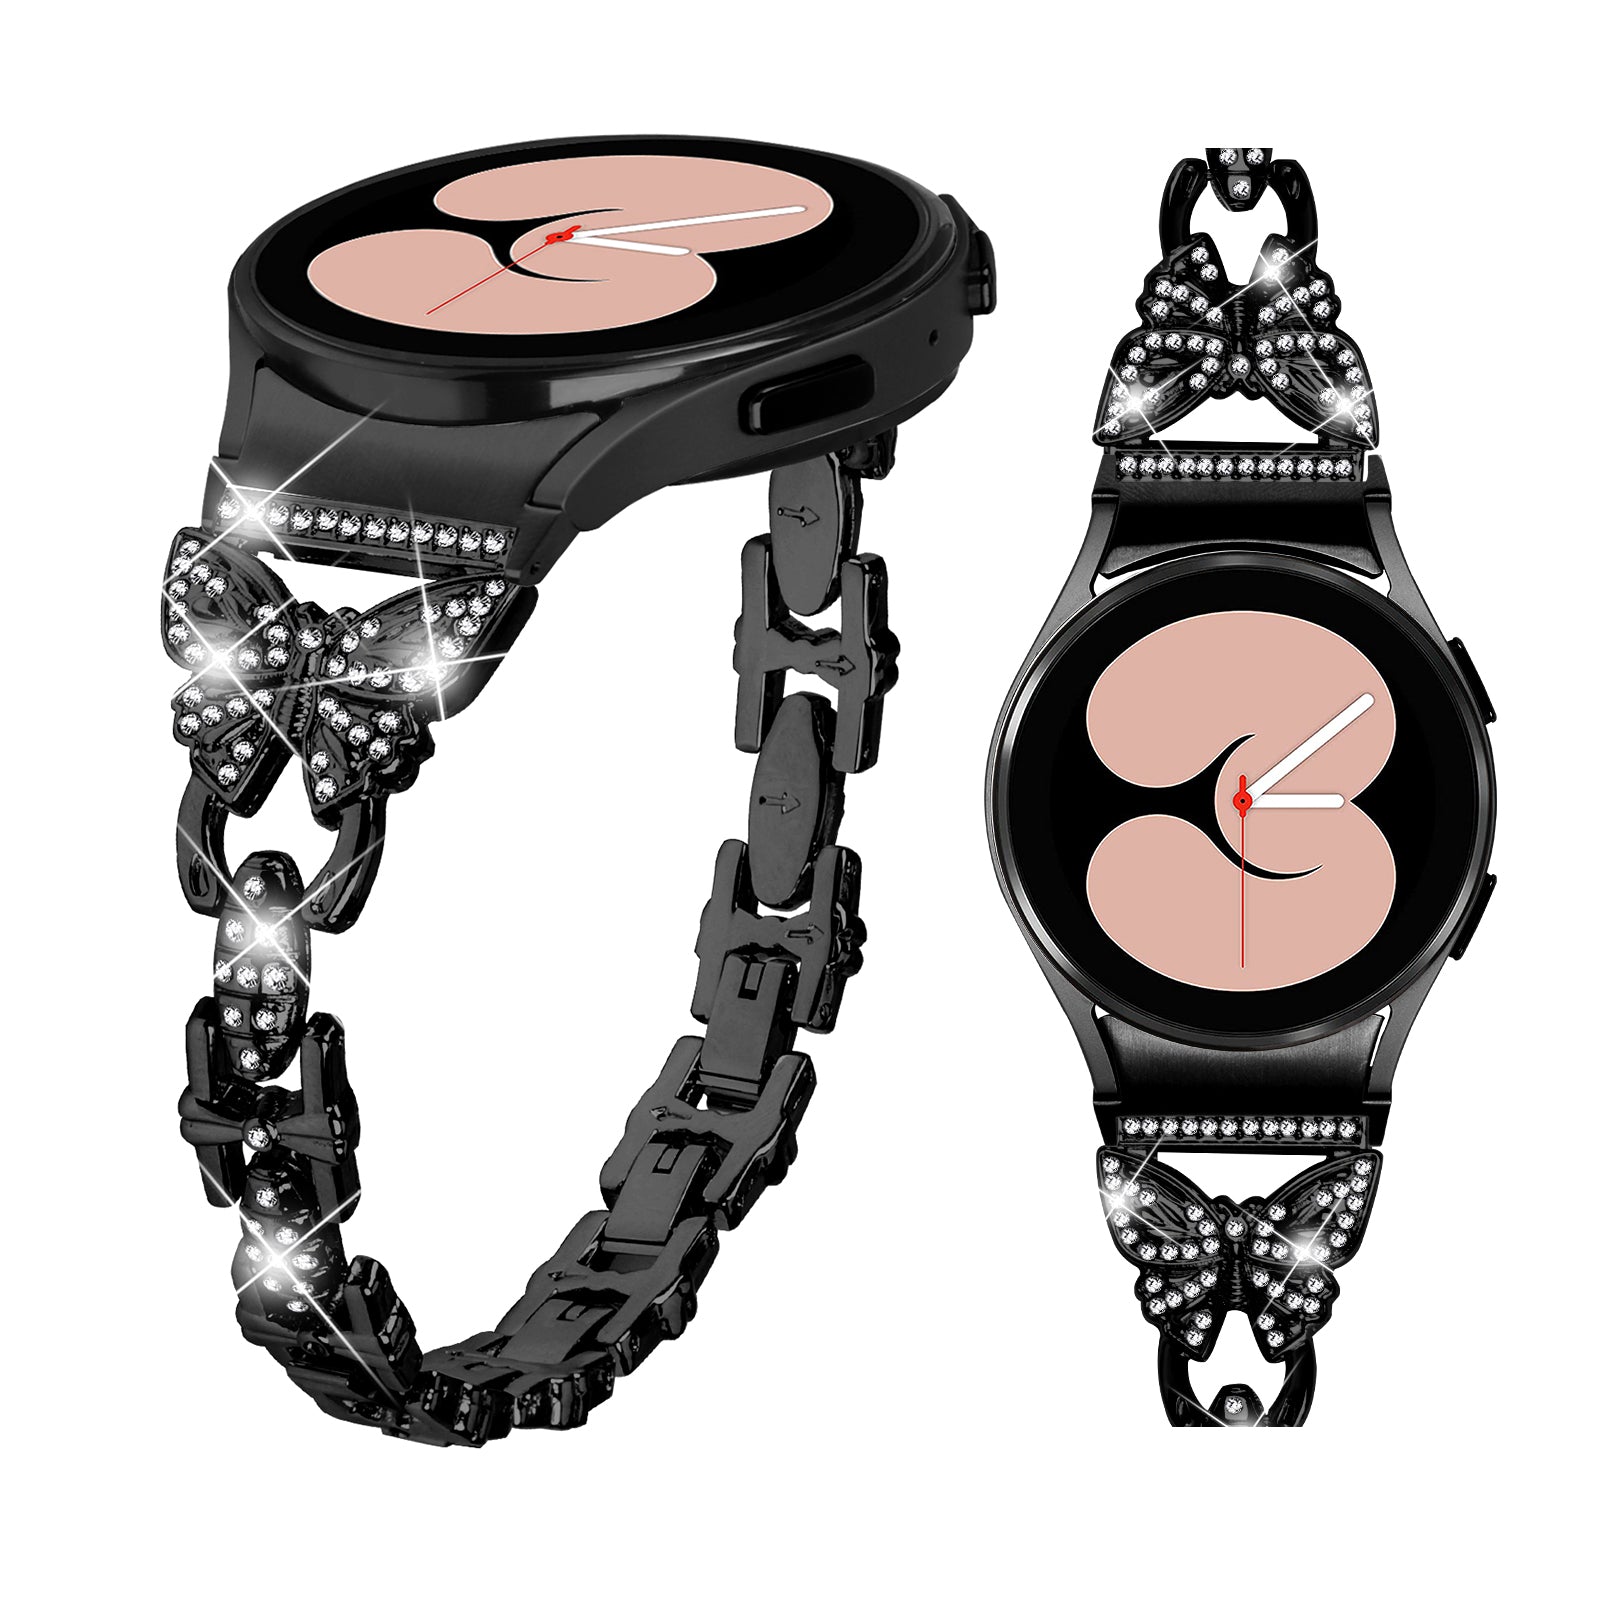 Stainless Steel Band for Samsung Galaxy Watch4 40mm 44mm / Watch4 Classic 42mm 46mm / Watch 5 40mm 44mm , Rhinestone Decor 20mm Watch Strap with Connector - Black